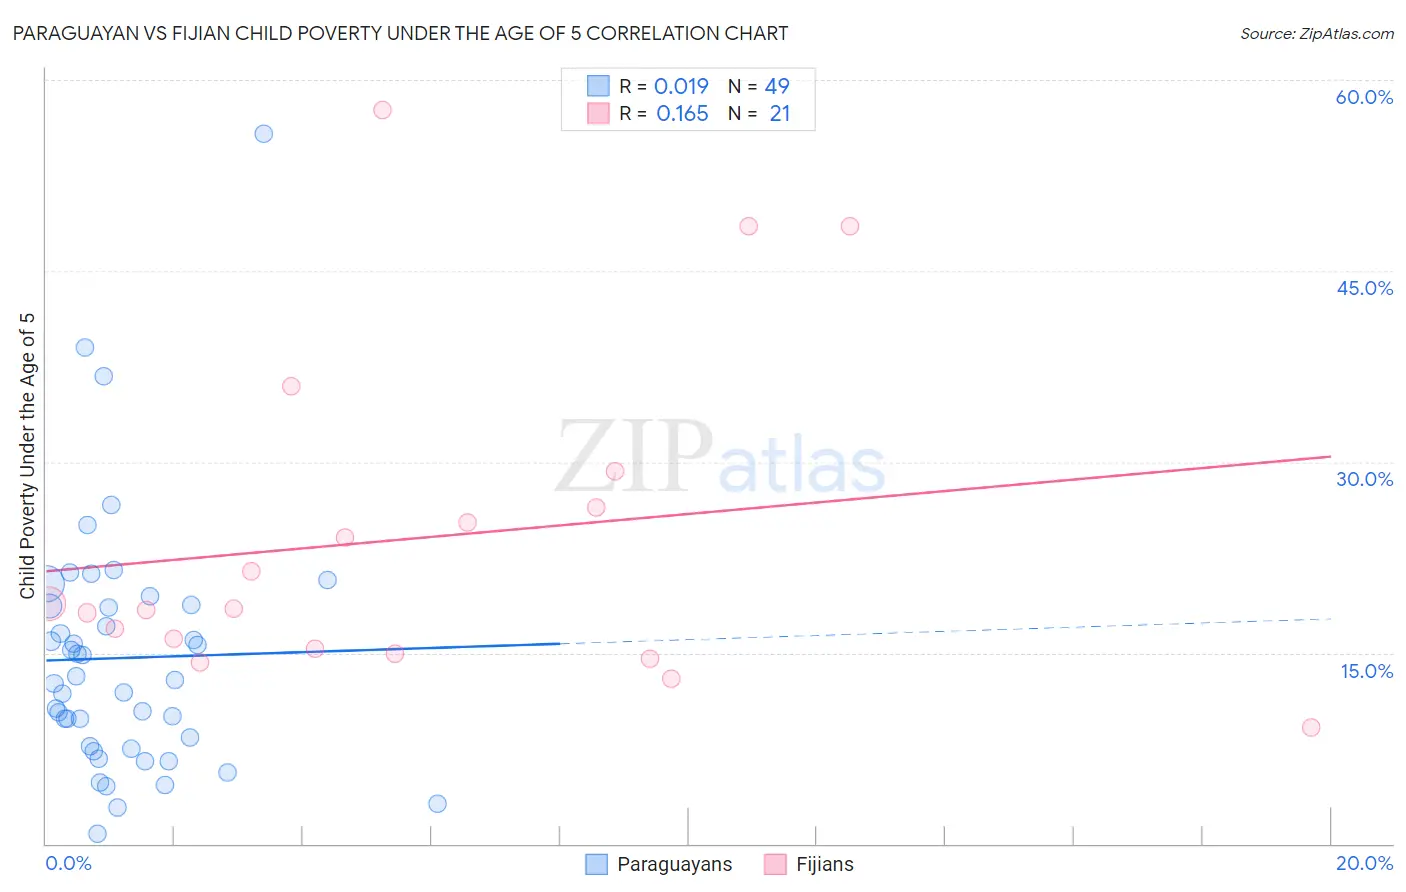 Paraguayan vs Fijian Child Poverty Under the Age of 5